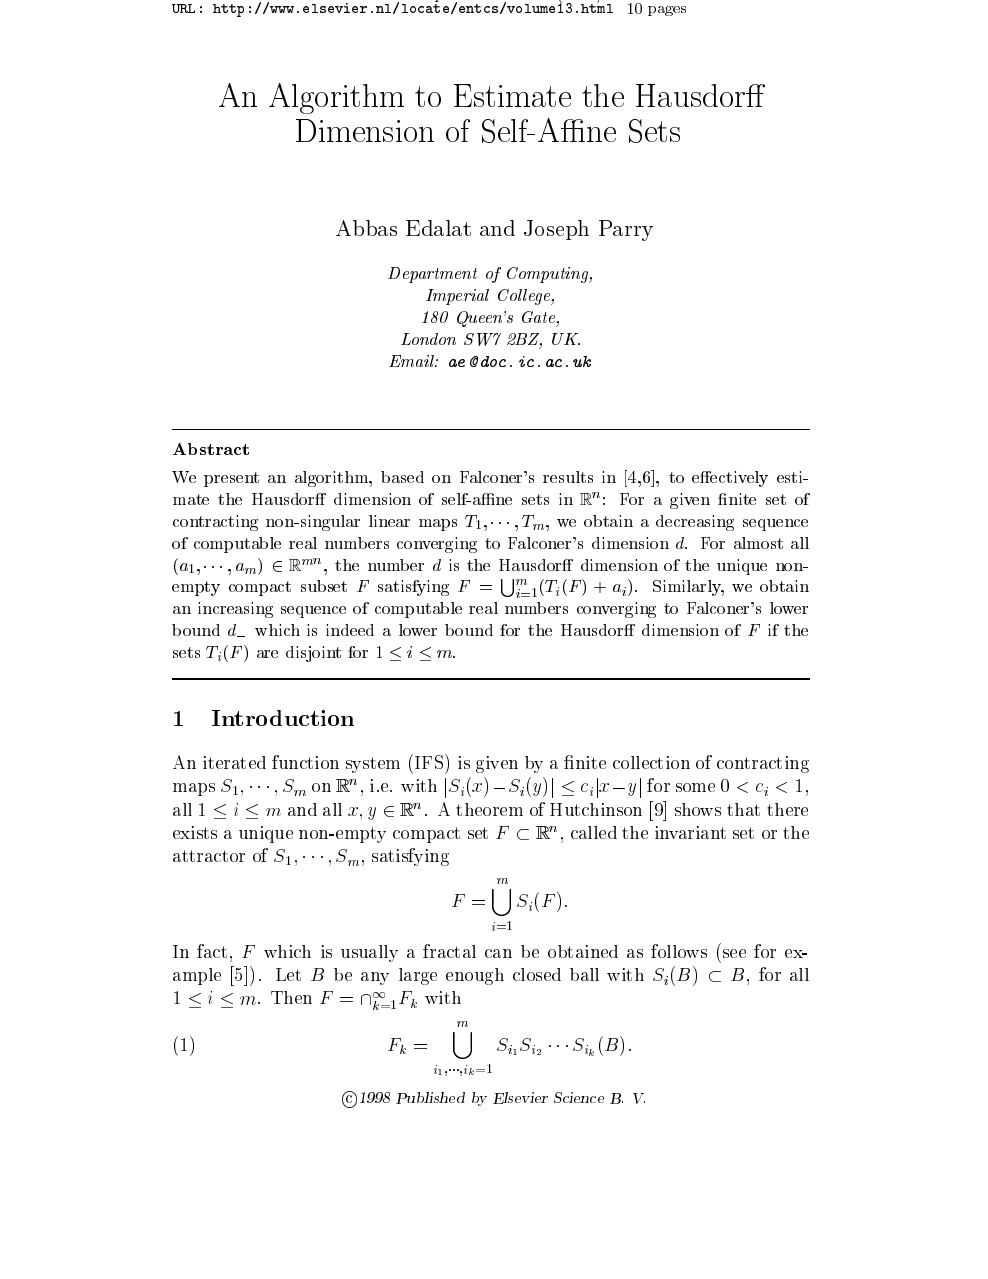 An Algorithm To Estimate The Hausdorff Dimension Of Self Affine Sets Topic Of Research Paper In Mathematics Download Scholarly Article Pdf And Read For Free On Cyberleninka Open Science Hub